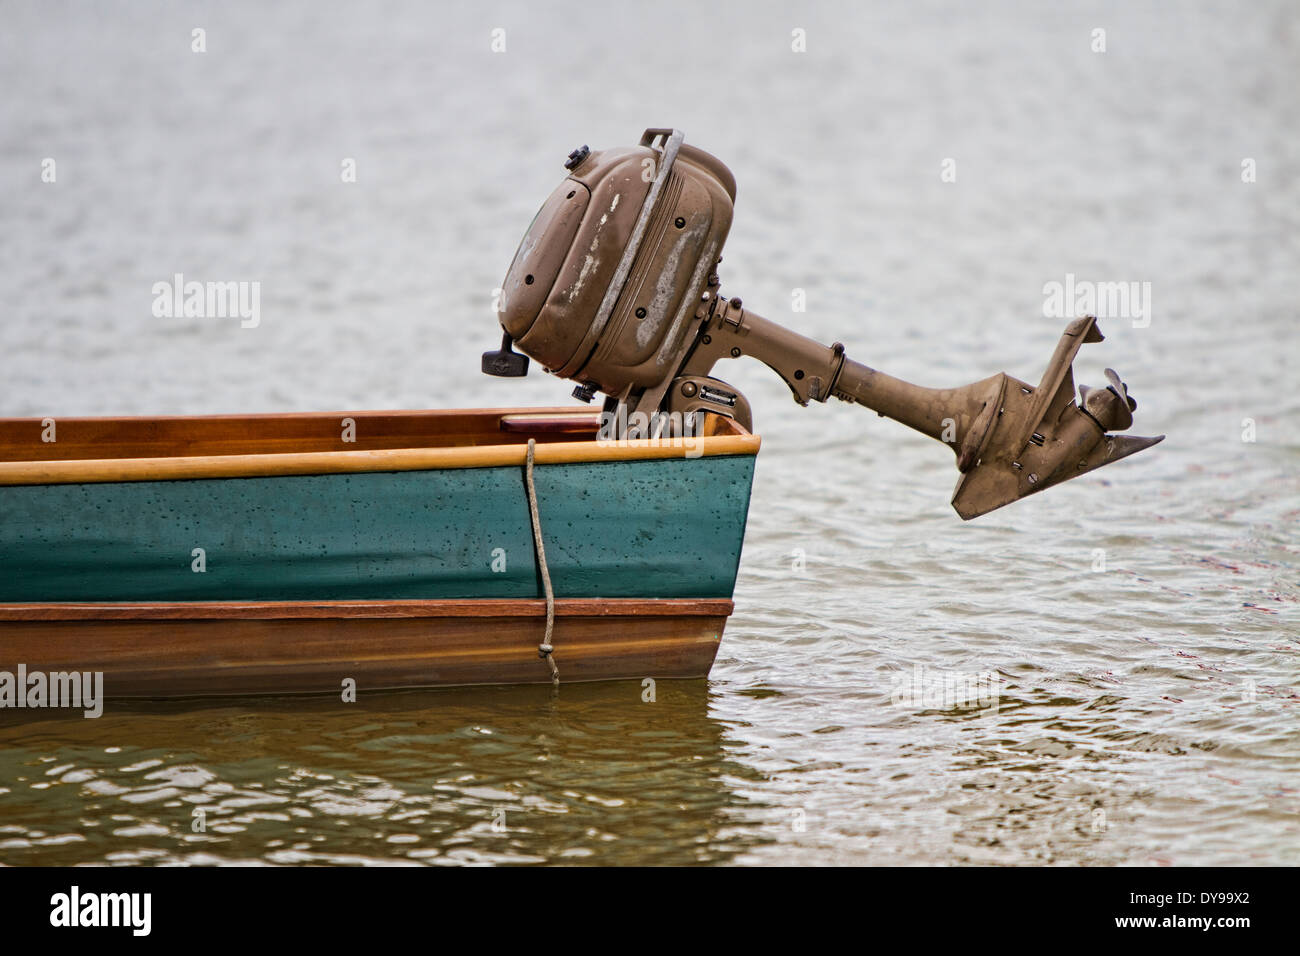 Antique Outboard Motor mounted on the transom of a wooden boat that is floating in the water Stock Photo